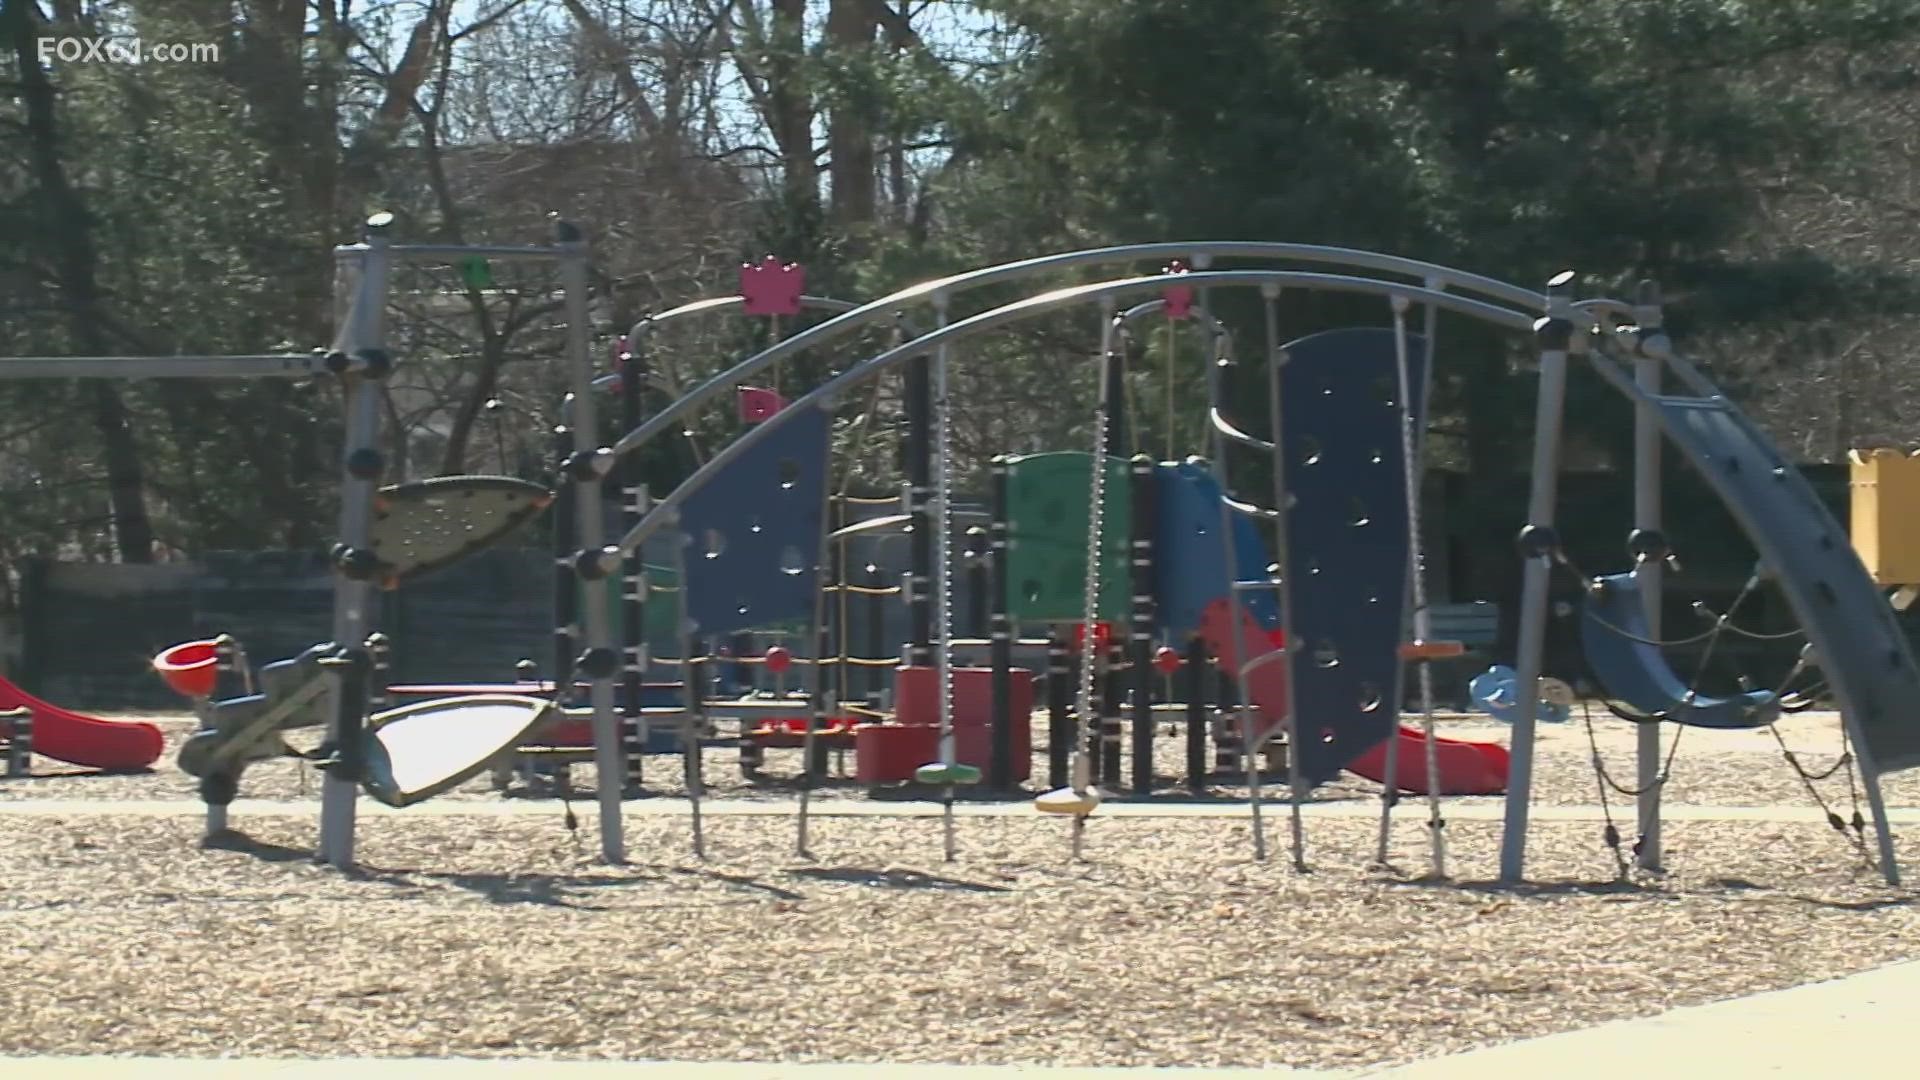 The Wallingford police chief said that crime involving teens and minors has gone up 165% from this time last year. Most recently juveniles lit fires at a playground.